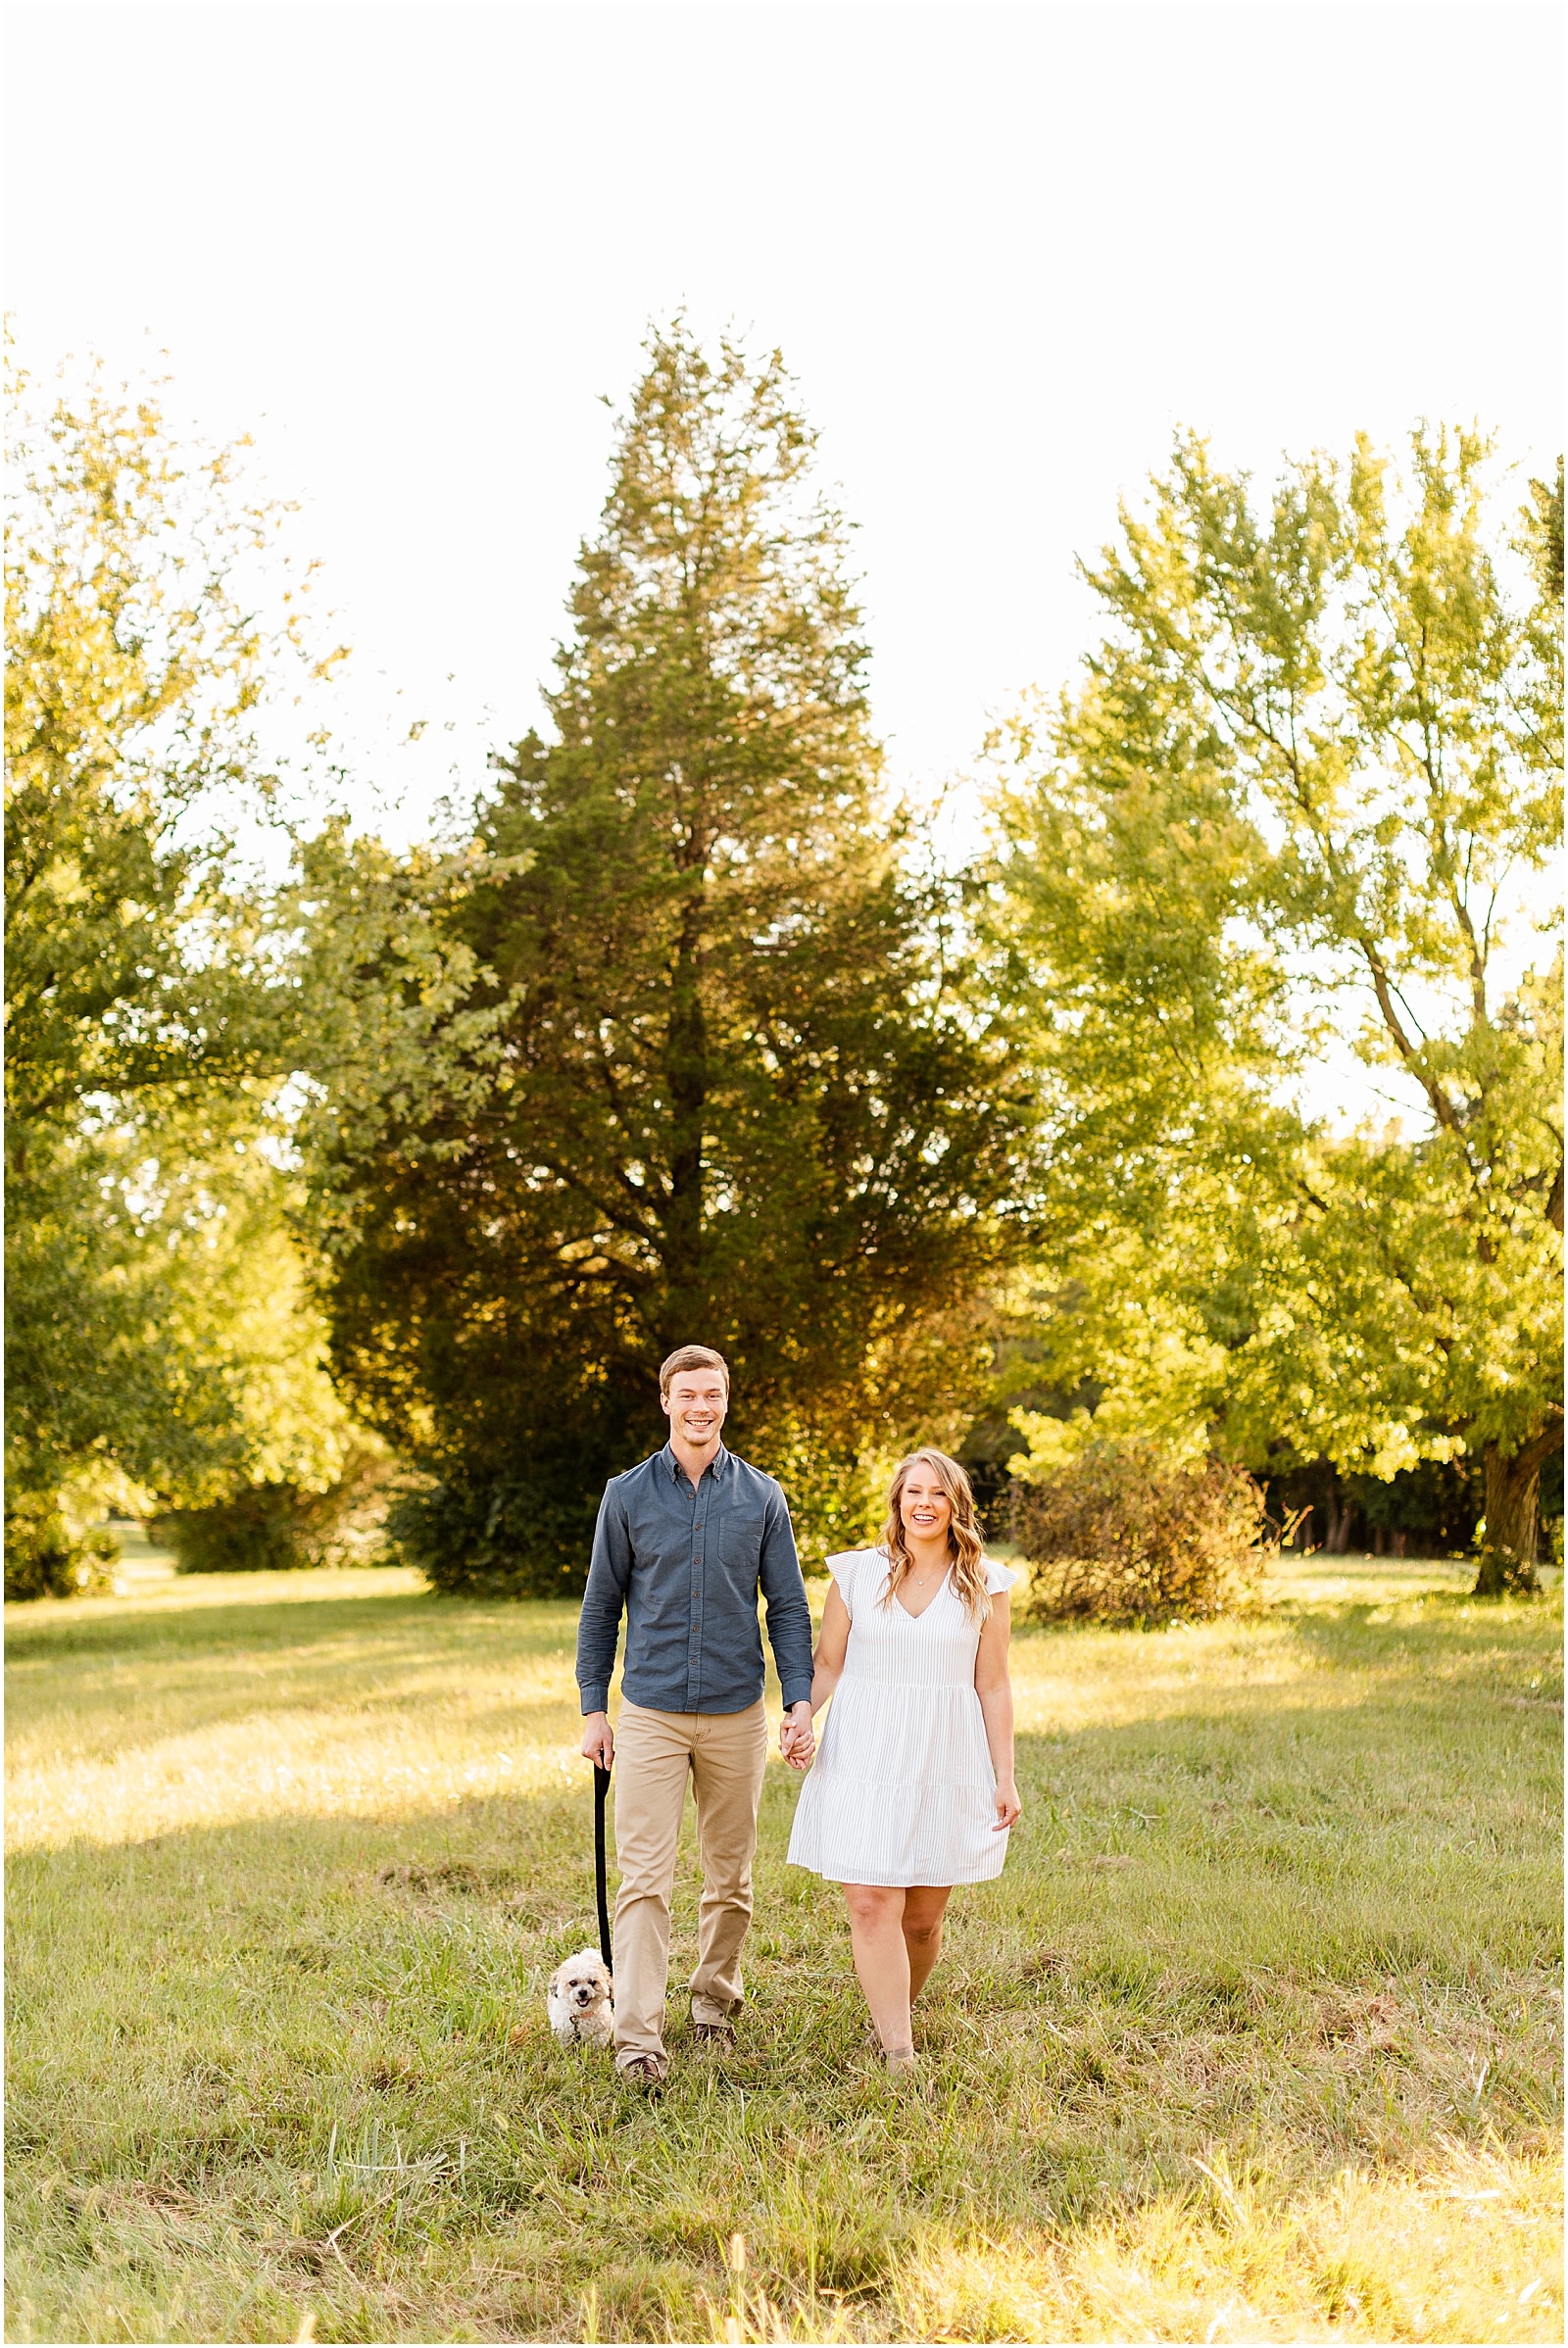 Nicole and Clark's Engagement Session at The Jasper Parklands Bret and Brandie Photography0008.jpg